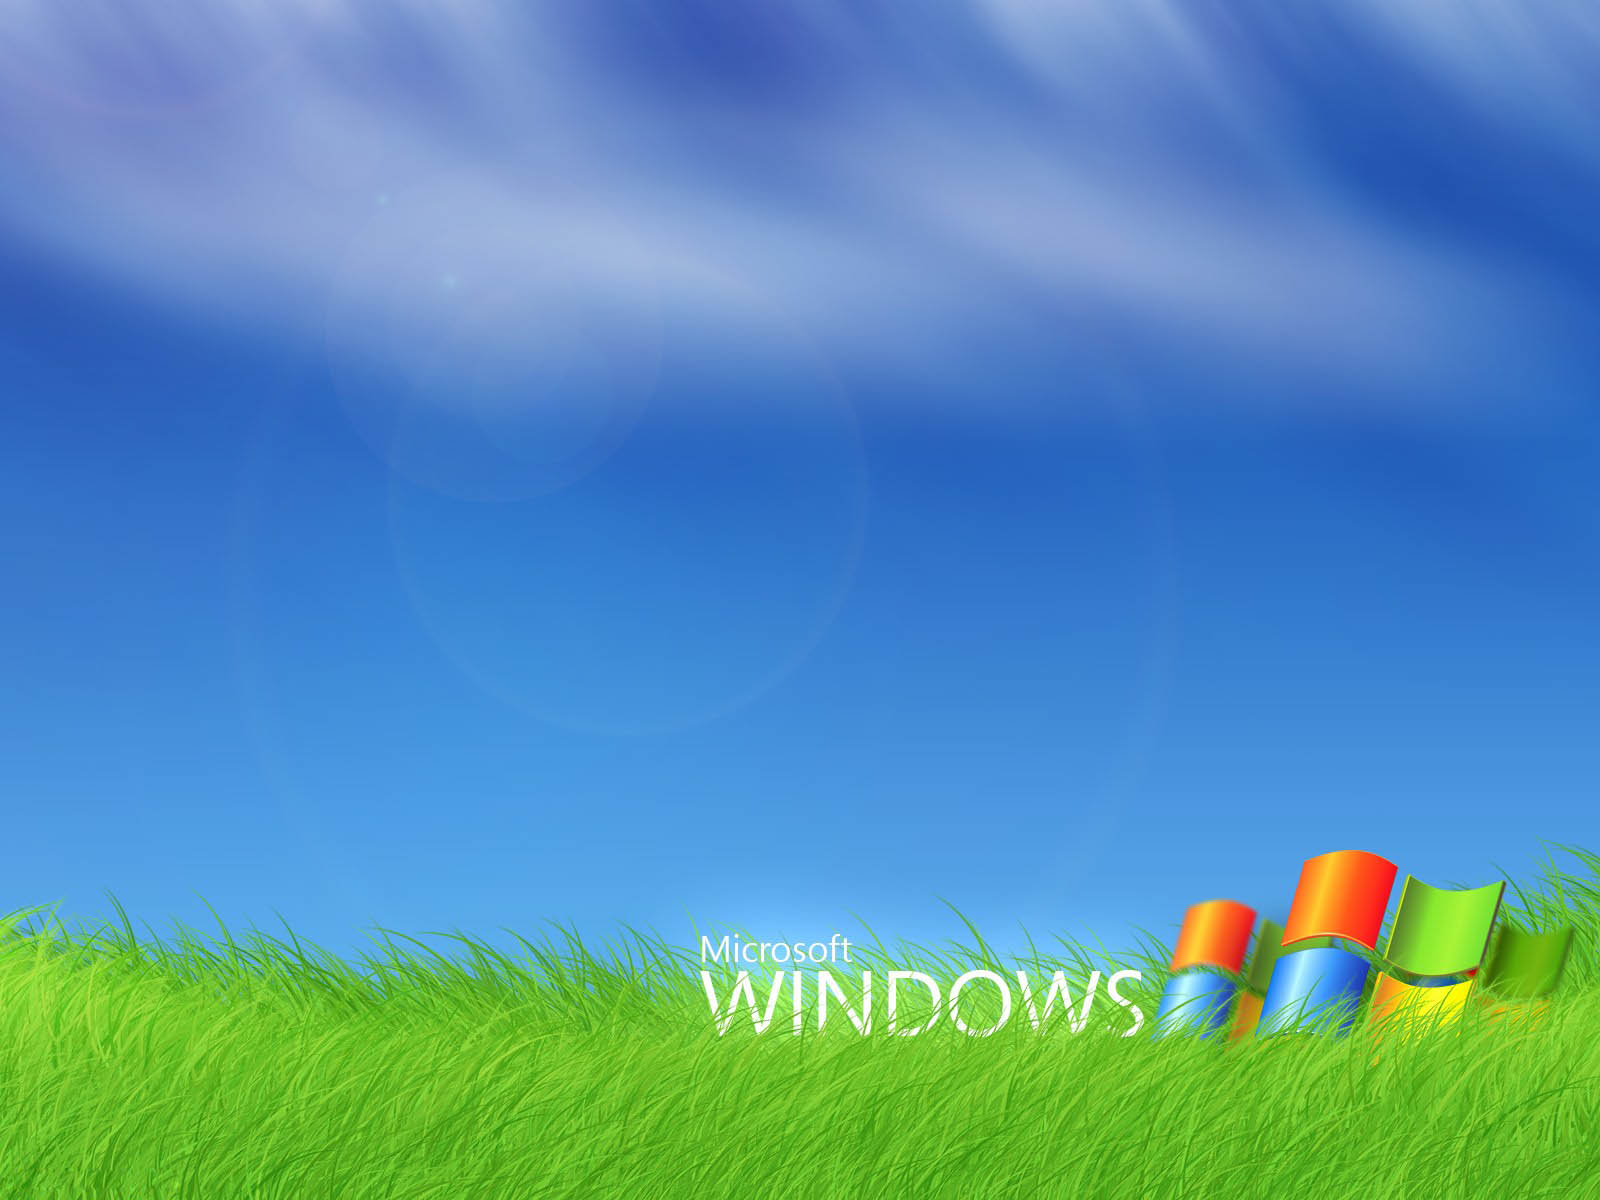 Tag Windows Xp Wallpaper Image Paos Pictures And Background For